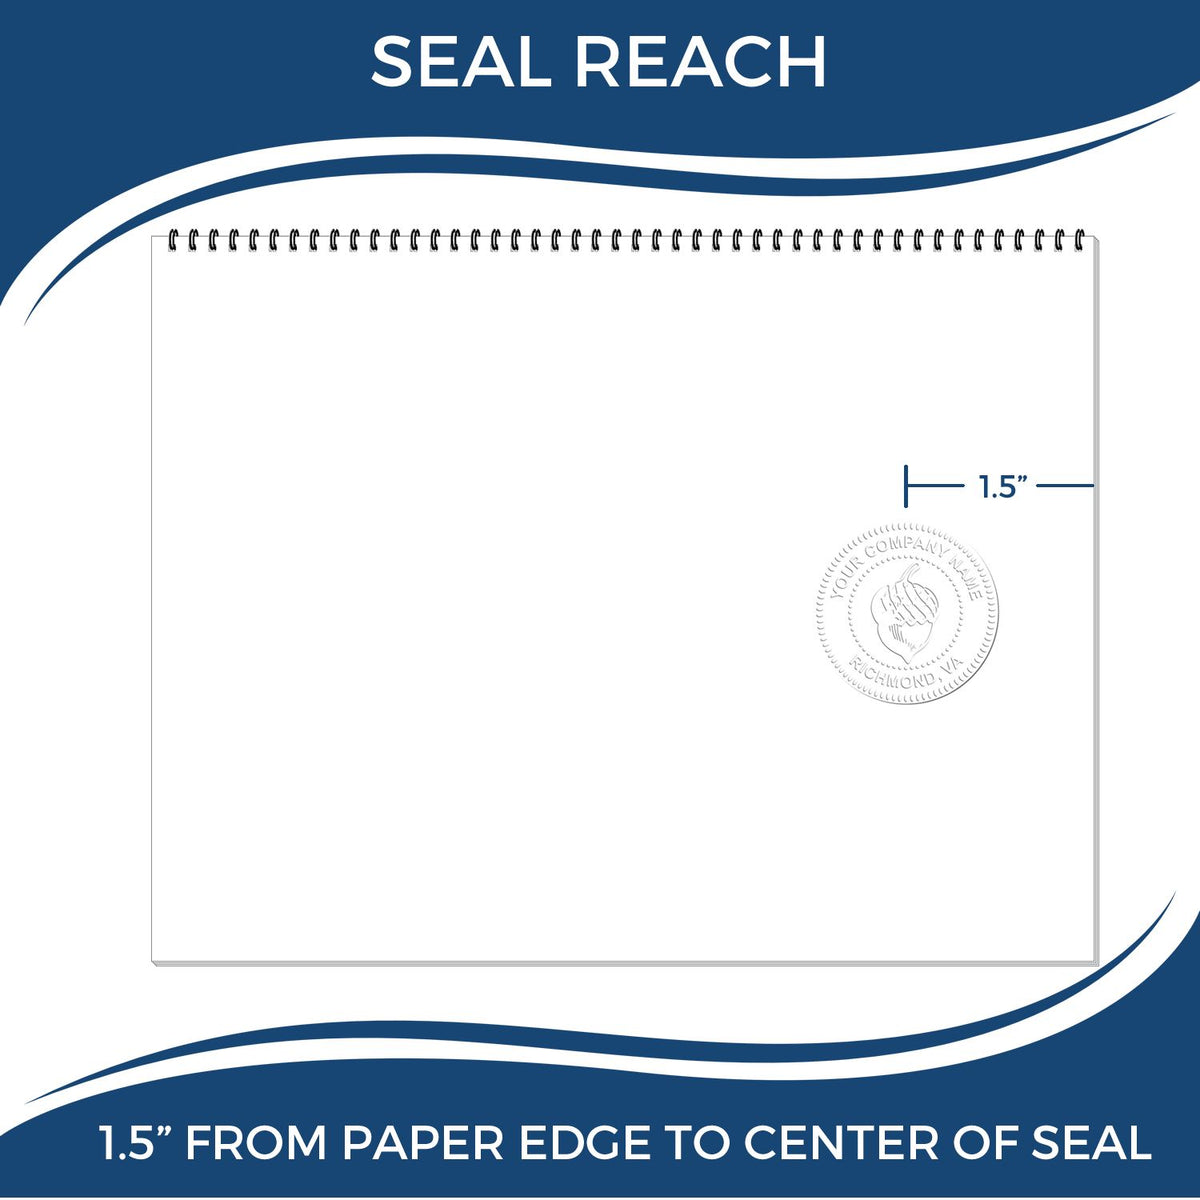 An infographic showing the seal reach which is represented by a ruler and a miniature seal image of the Hybrid Louisiana Engineer Seal